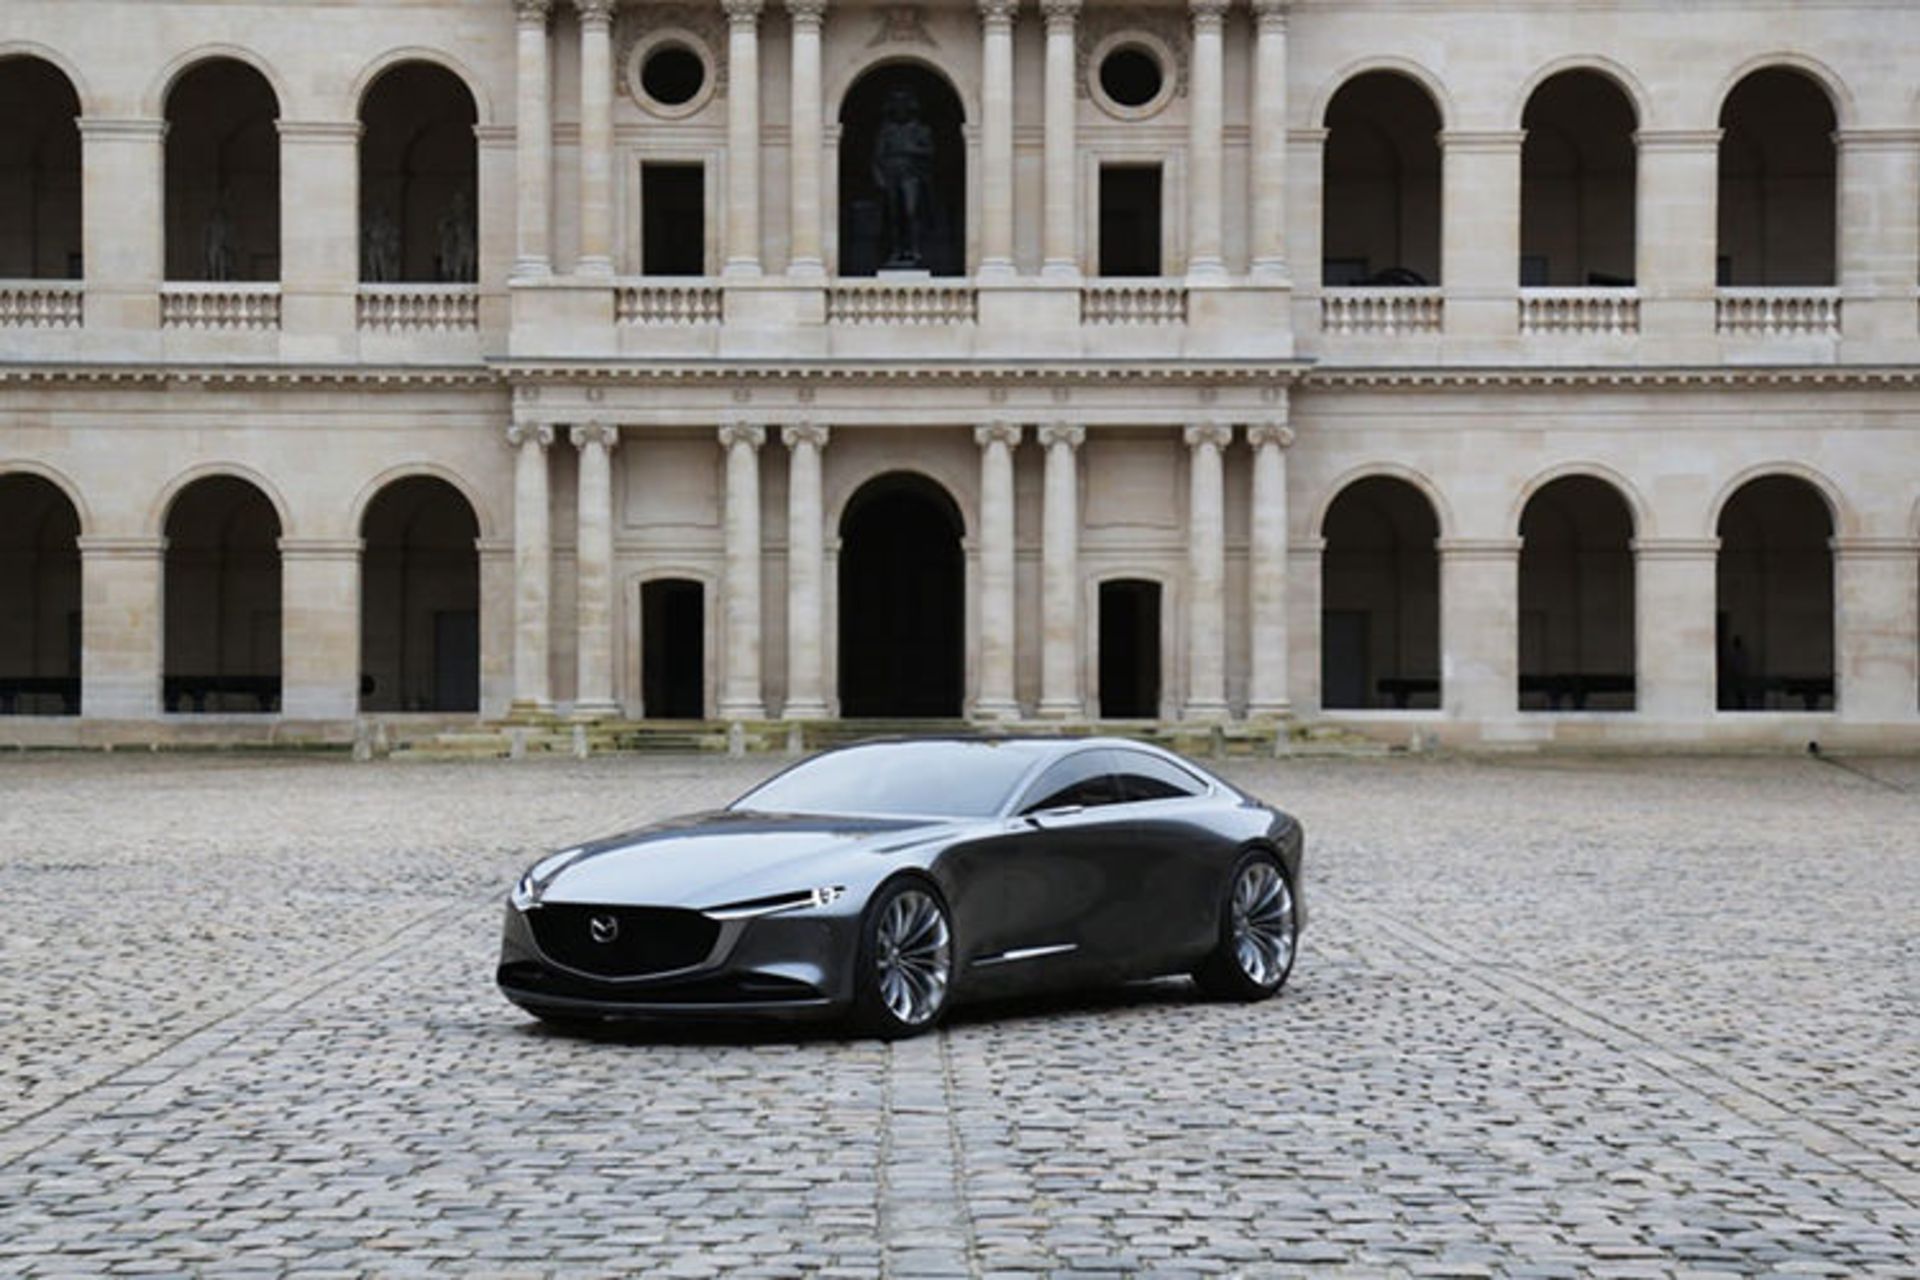 Mazda Vision Coupe / خودروی مفهومی مزدا ویژن کوپه